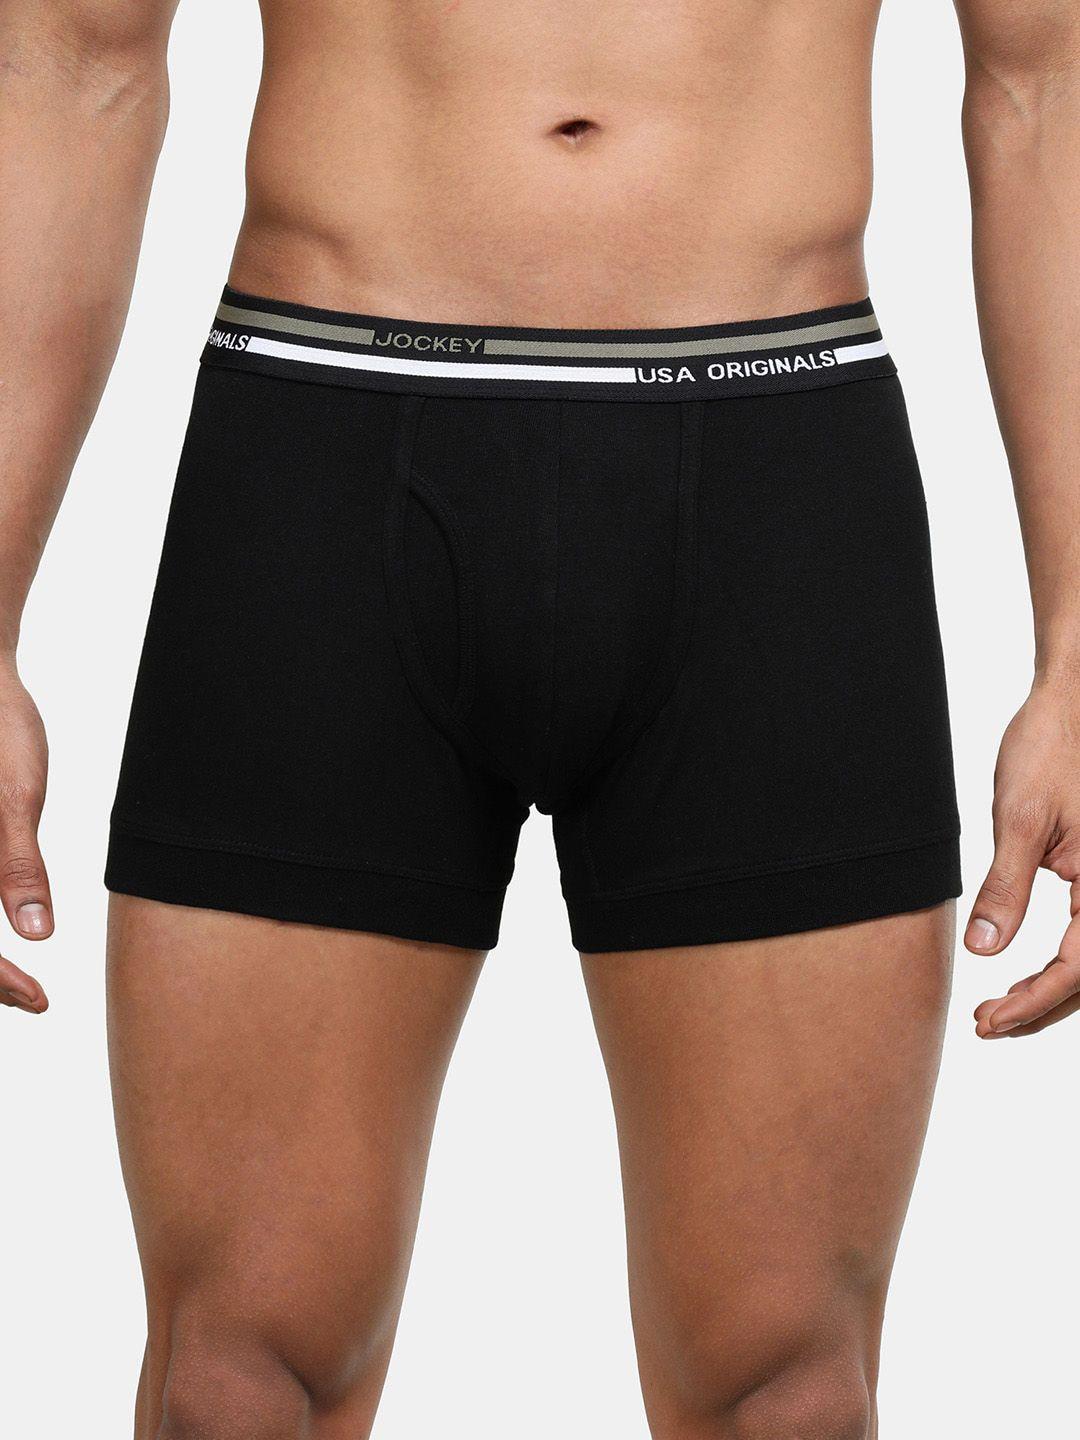 jockey-men-super-combed-cotton-trunk-with-ultrasoft-and-durable-waistband-ui22-0105